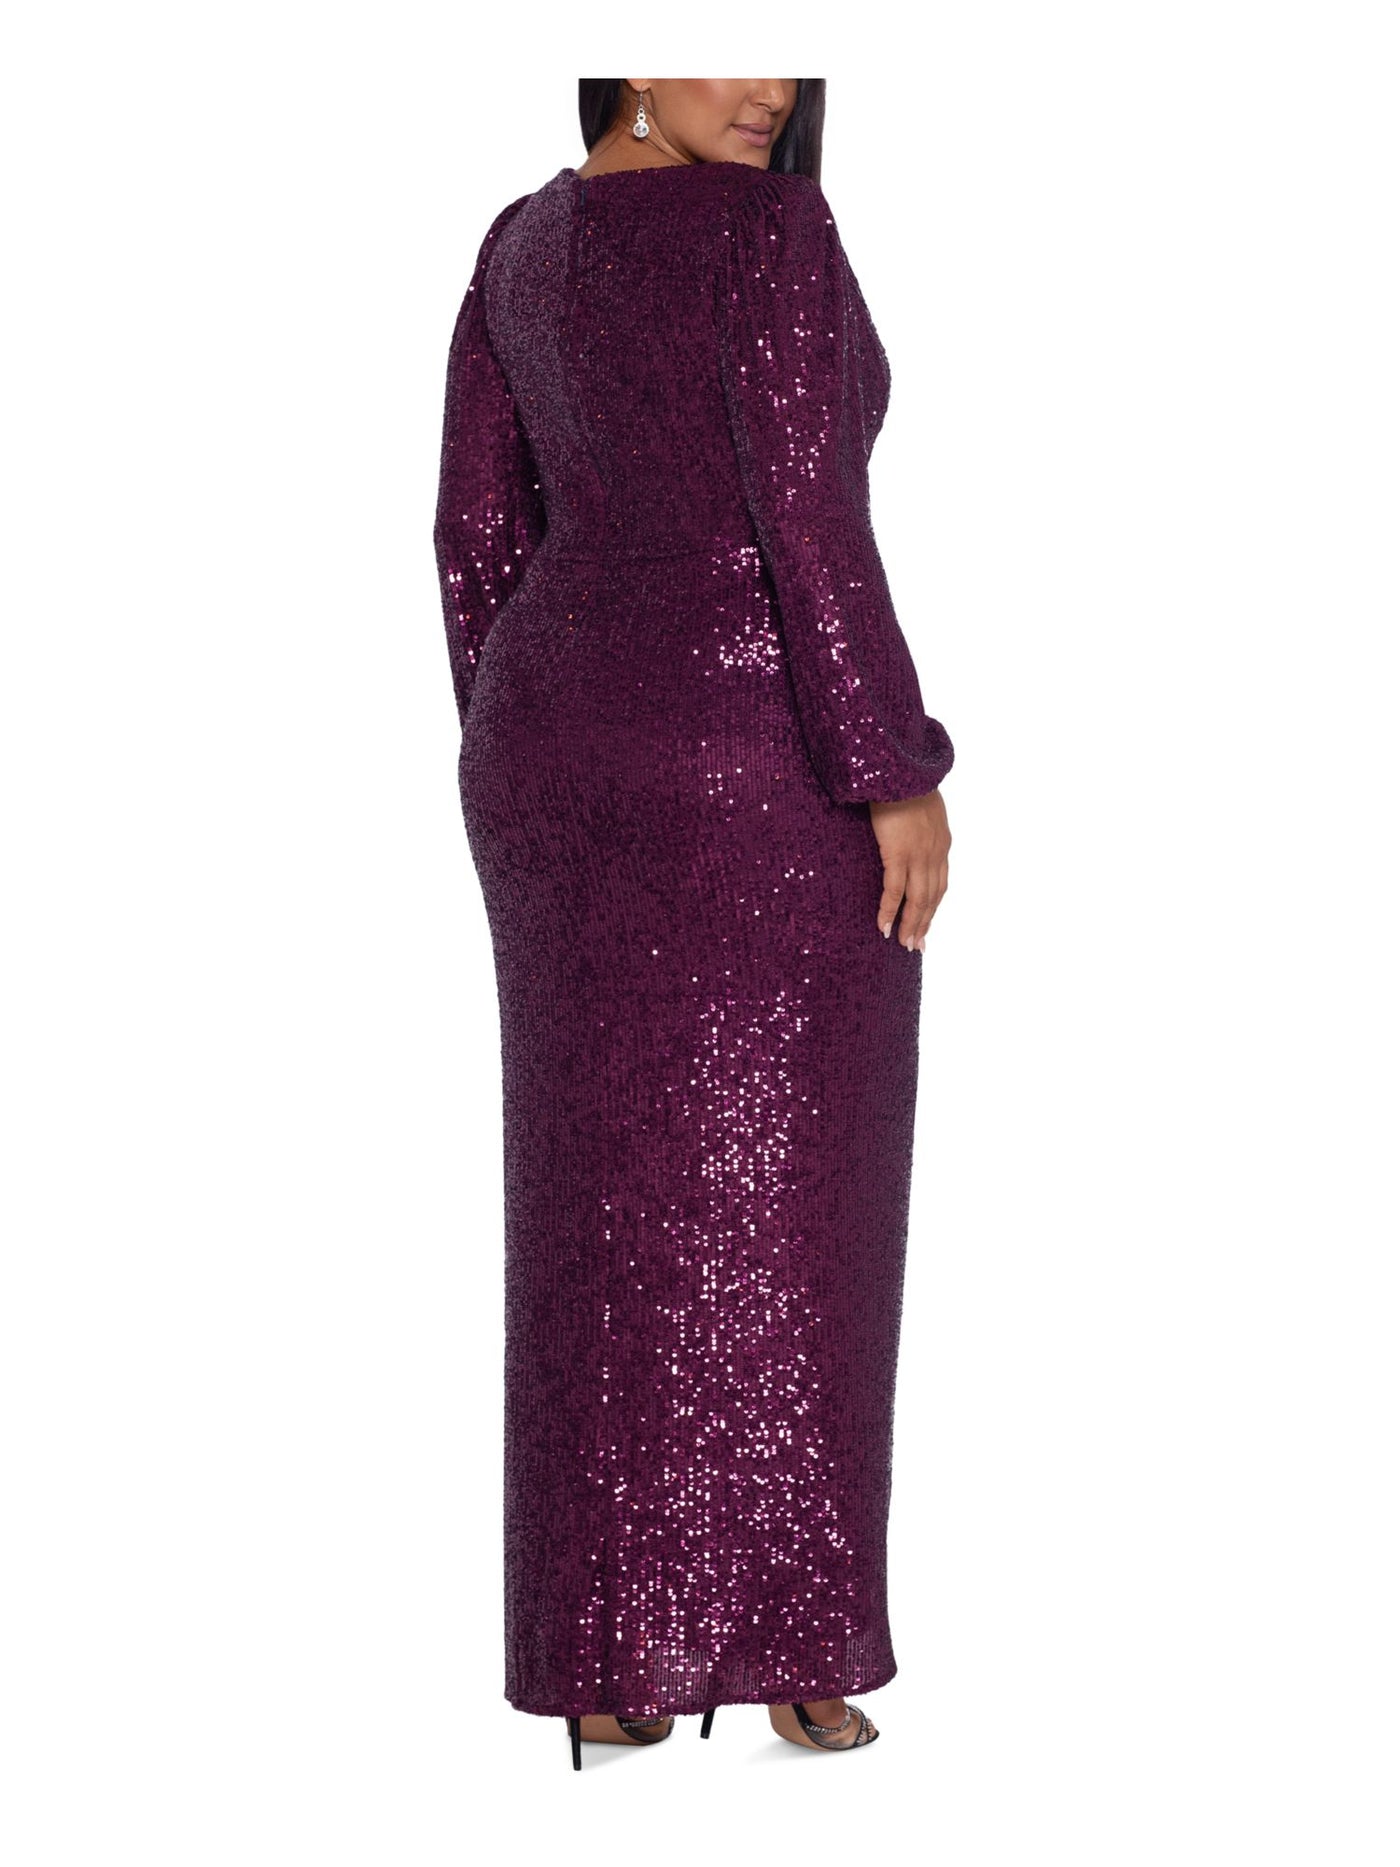 XSCAPE Womens Burgundy Sequined Slitted Zippered Long Sleeve V Neck Tea-Length Evening Gown Dress Plus 18W